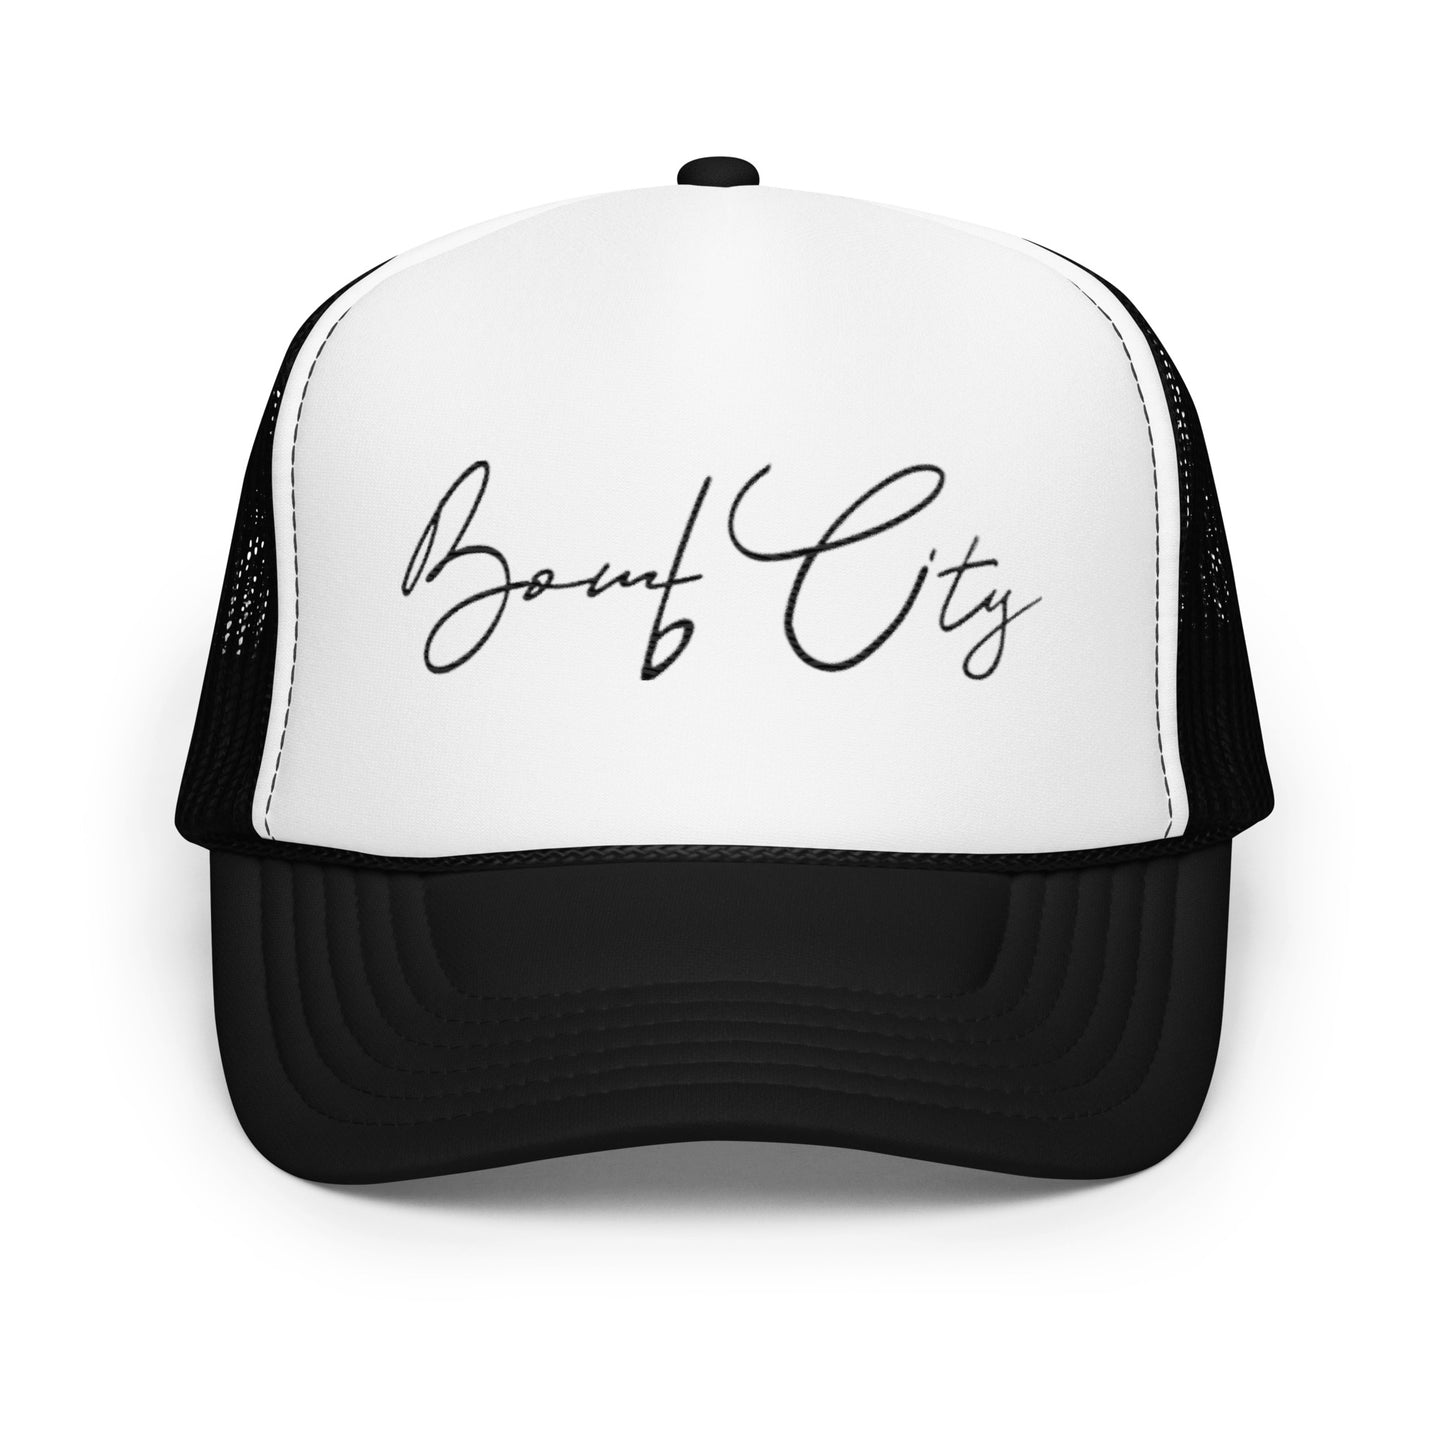 Bomb City Foam trucker hat (Available in Multiple Colors)